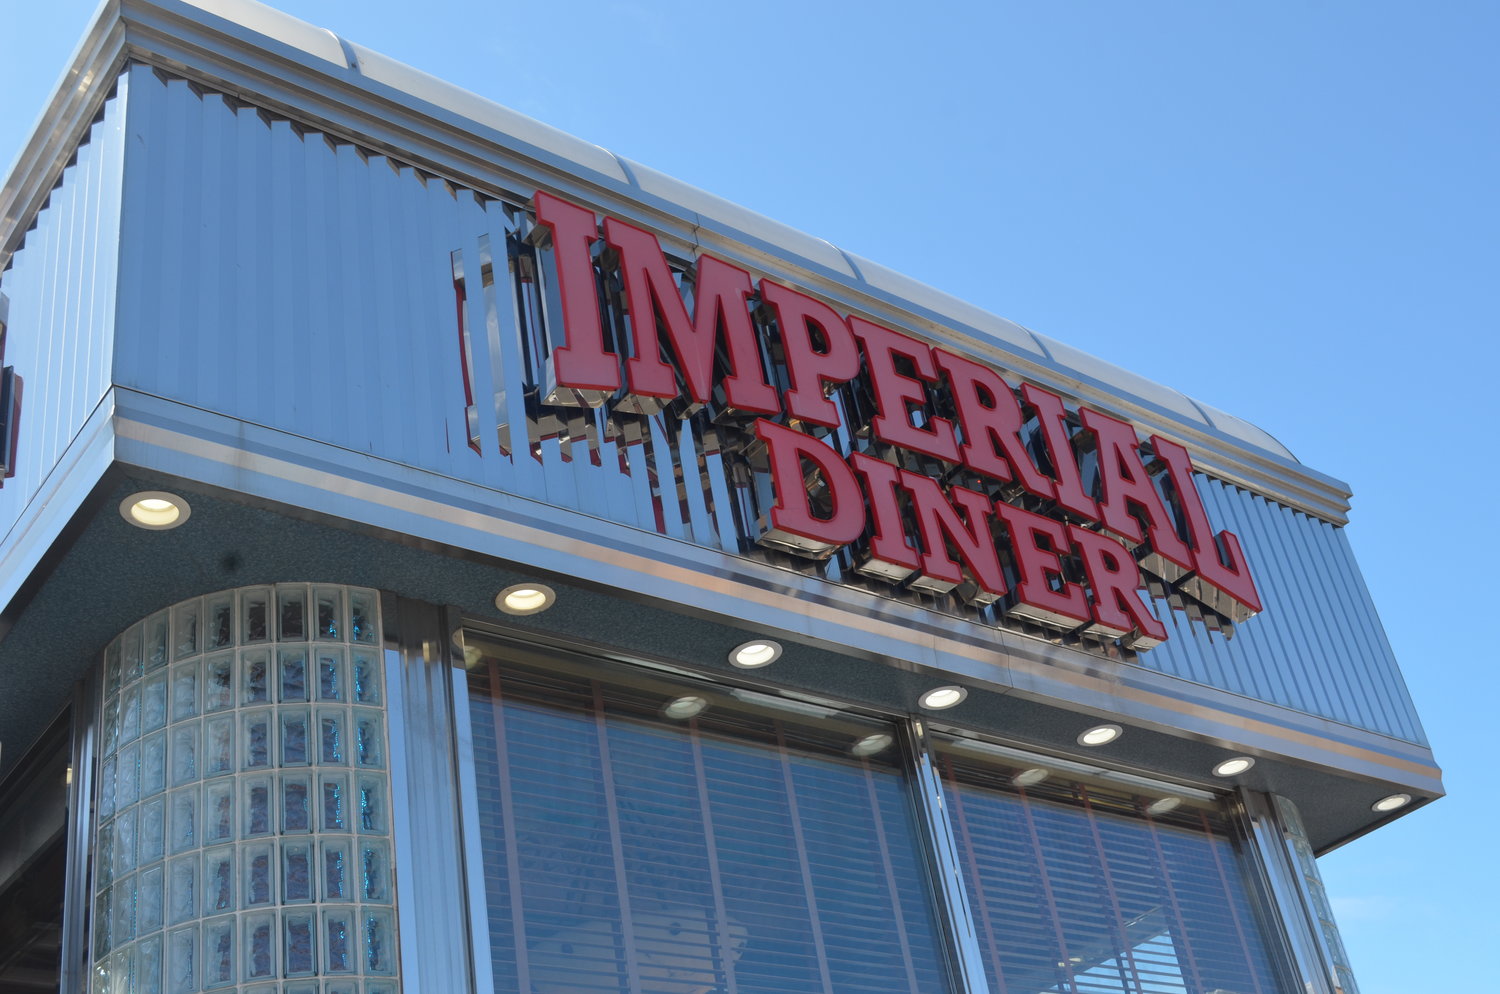 The marquee of the Imperial Diner at 63 W. Merrick Road has been a magnet for seekers of good food and fellowship for half a century.